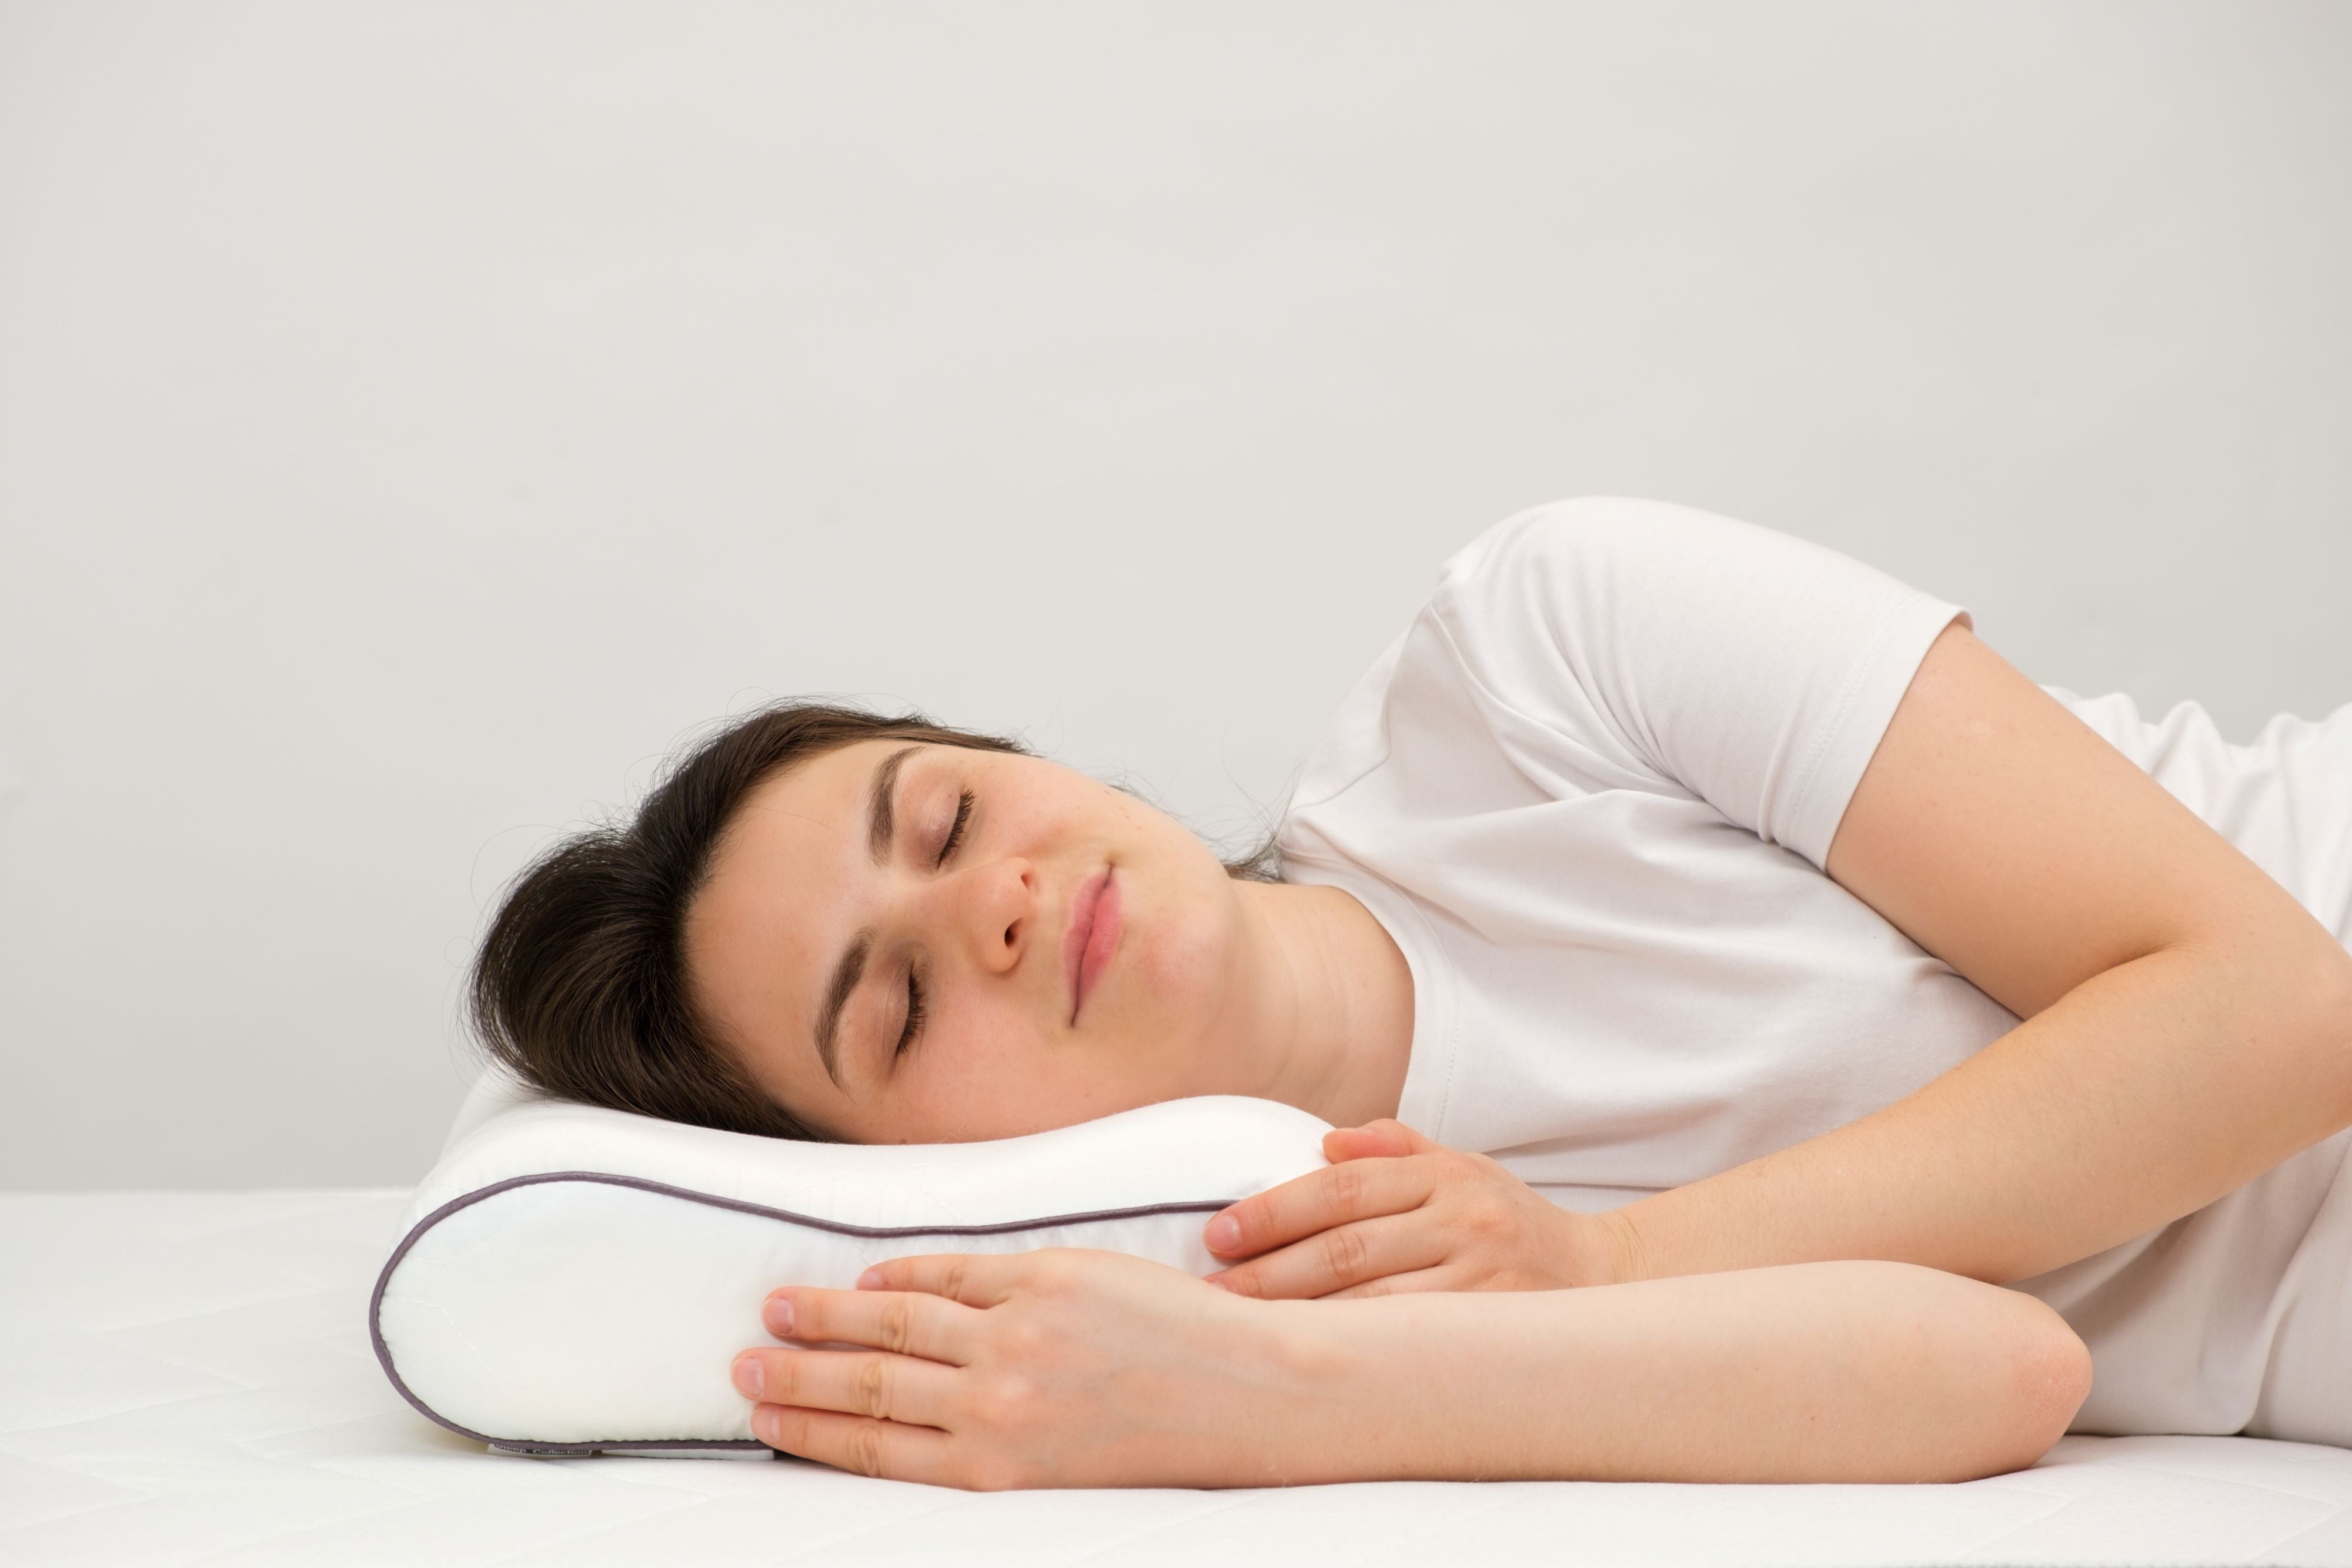 A woman sleeps comfortably on an orthopedic pillow made of memory foam, lying on a bed.